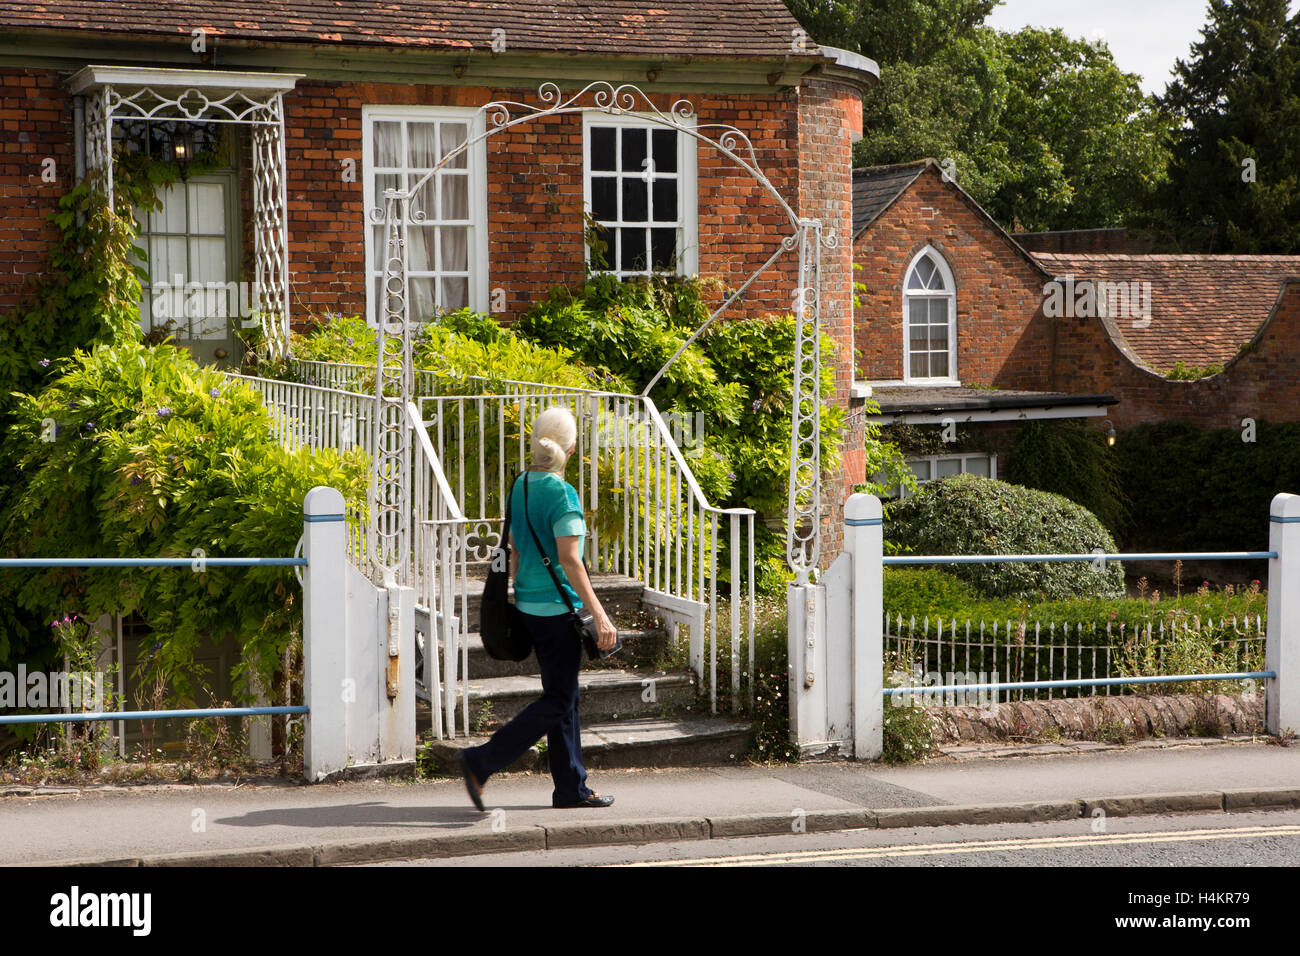 England, Berkshire, Hungerford, High Street, woman walking past house with footbridge to front door beside Kennet and Avon Canal Stock Photo